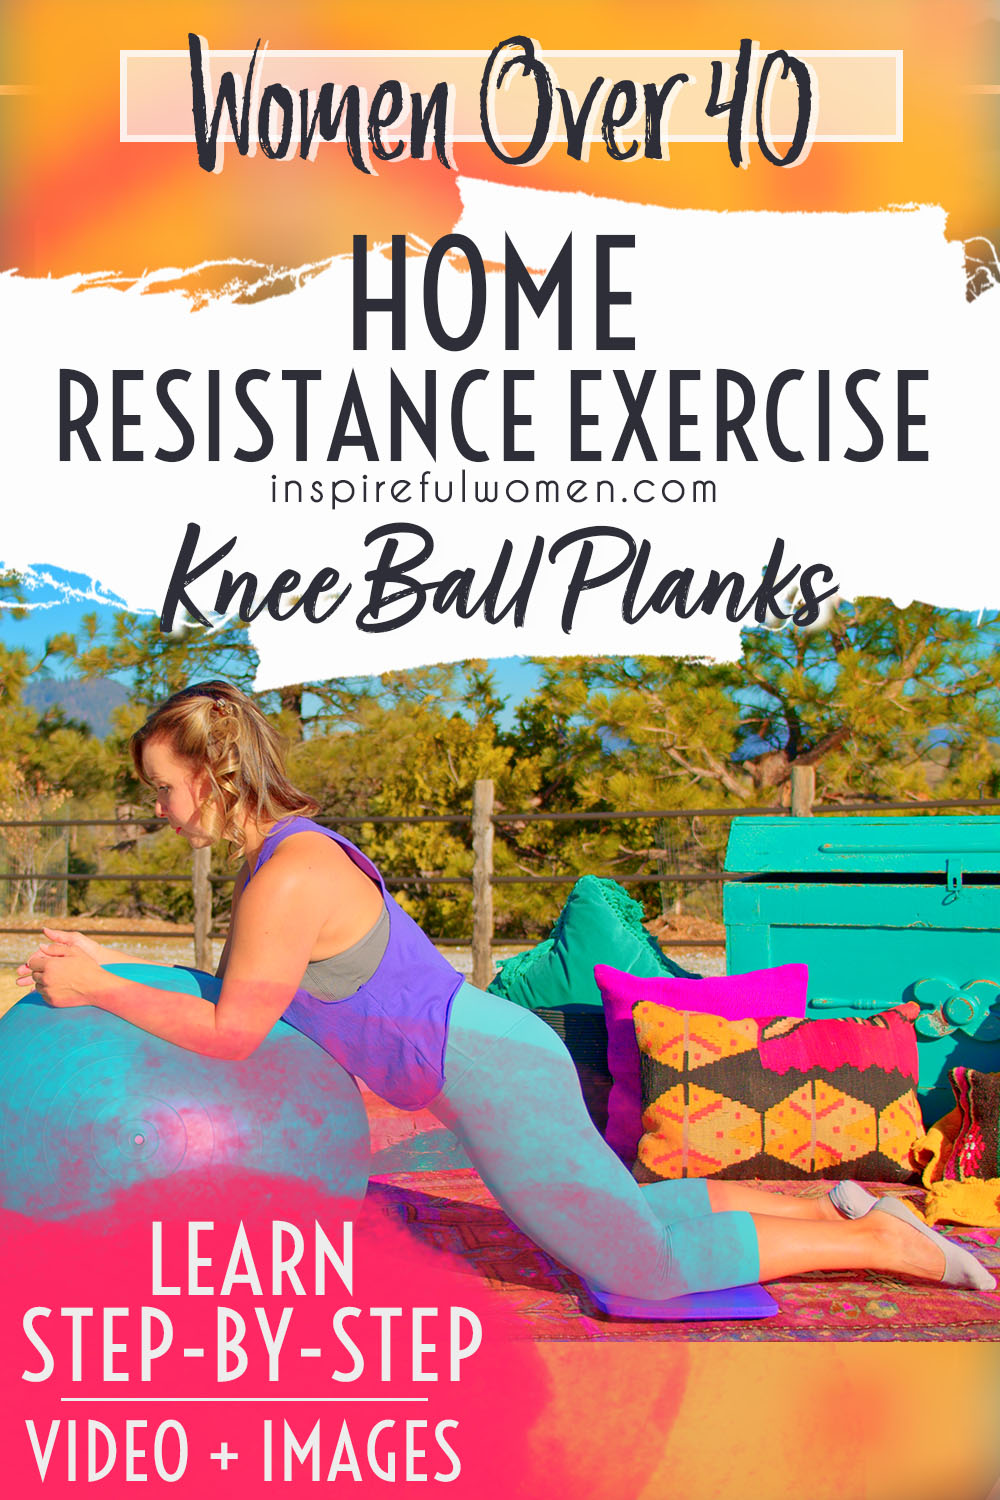 knee-forearm-stability-ball-plank-neutral-spine-core-exercise-women-40+